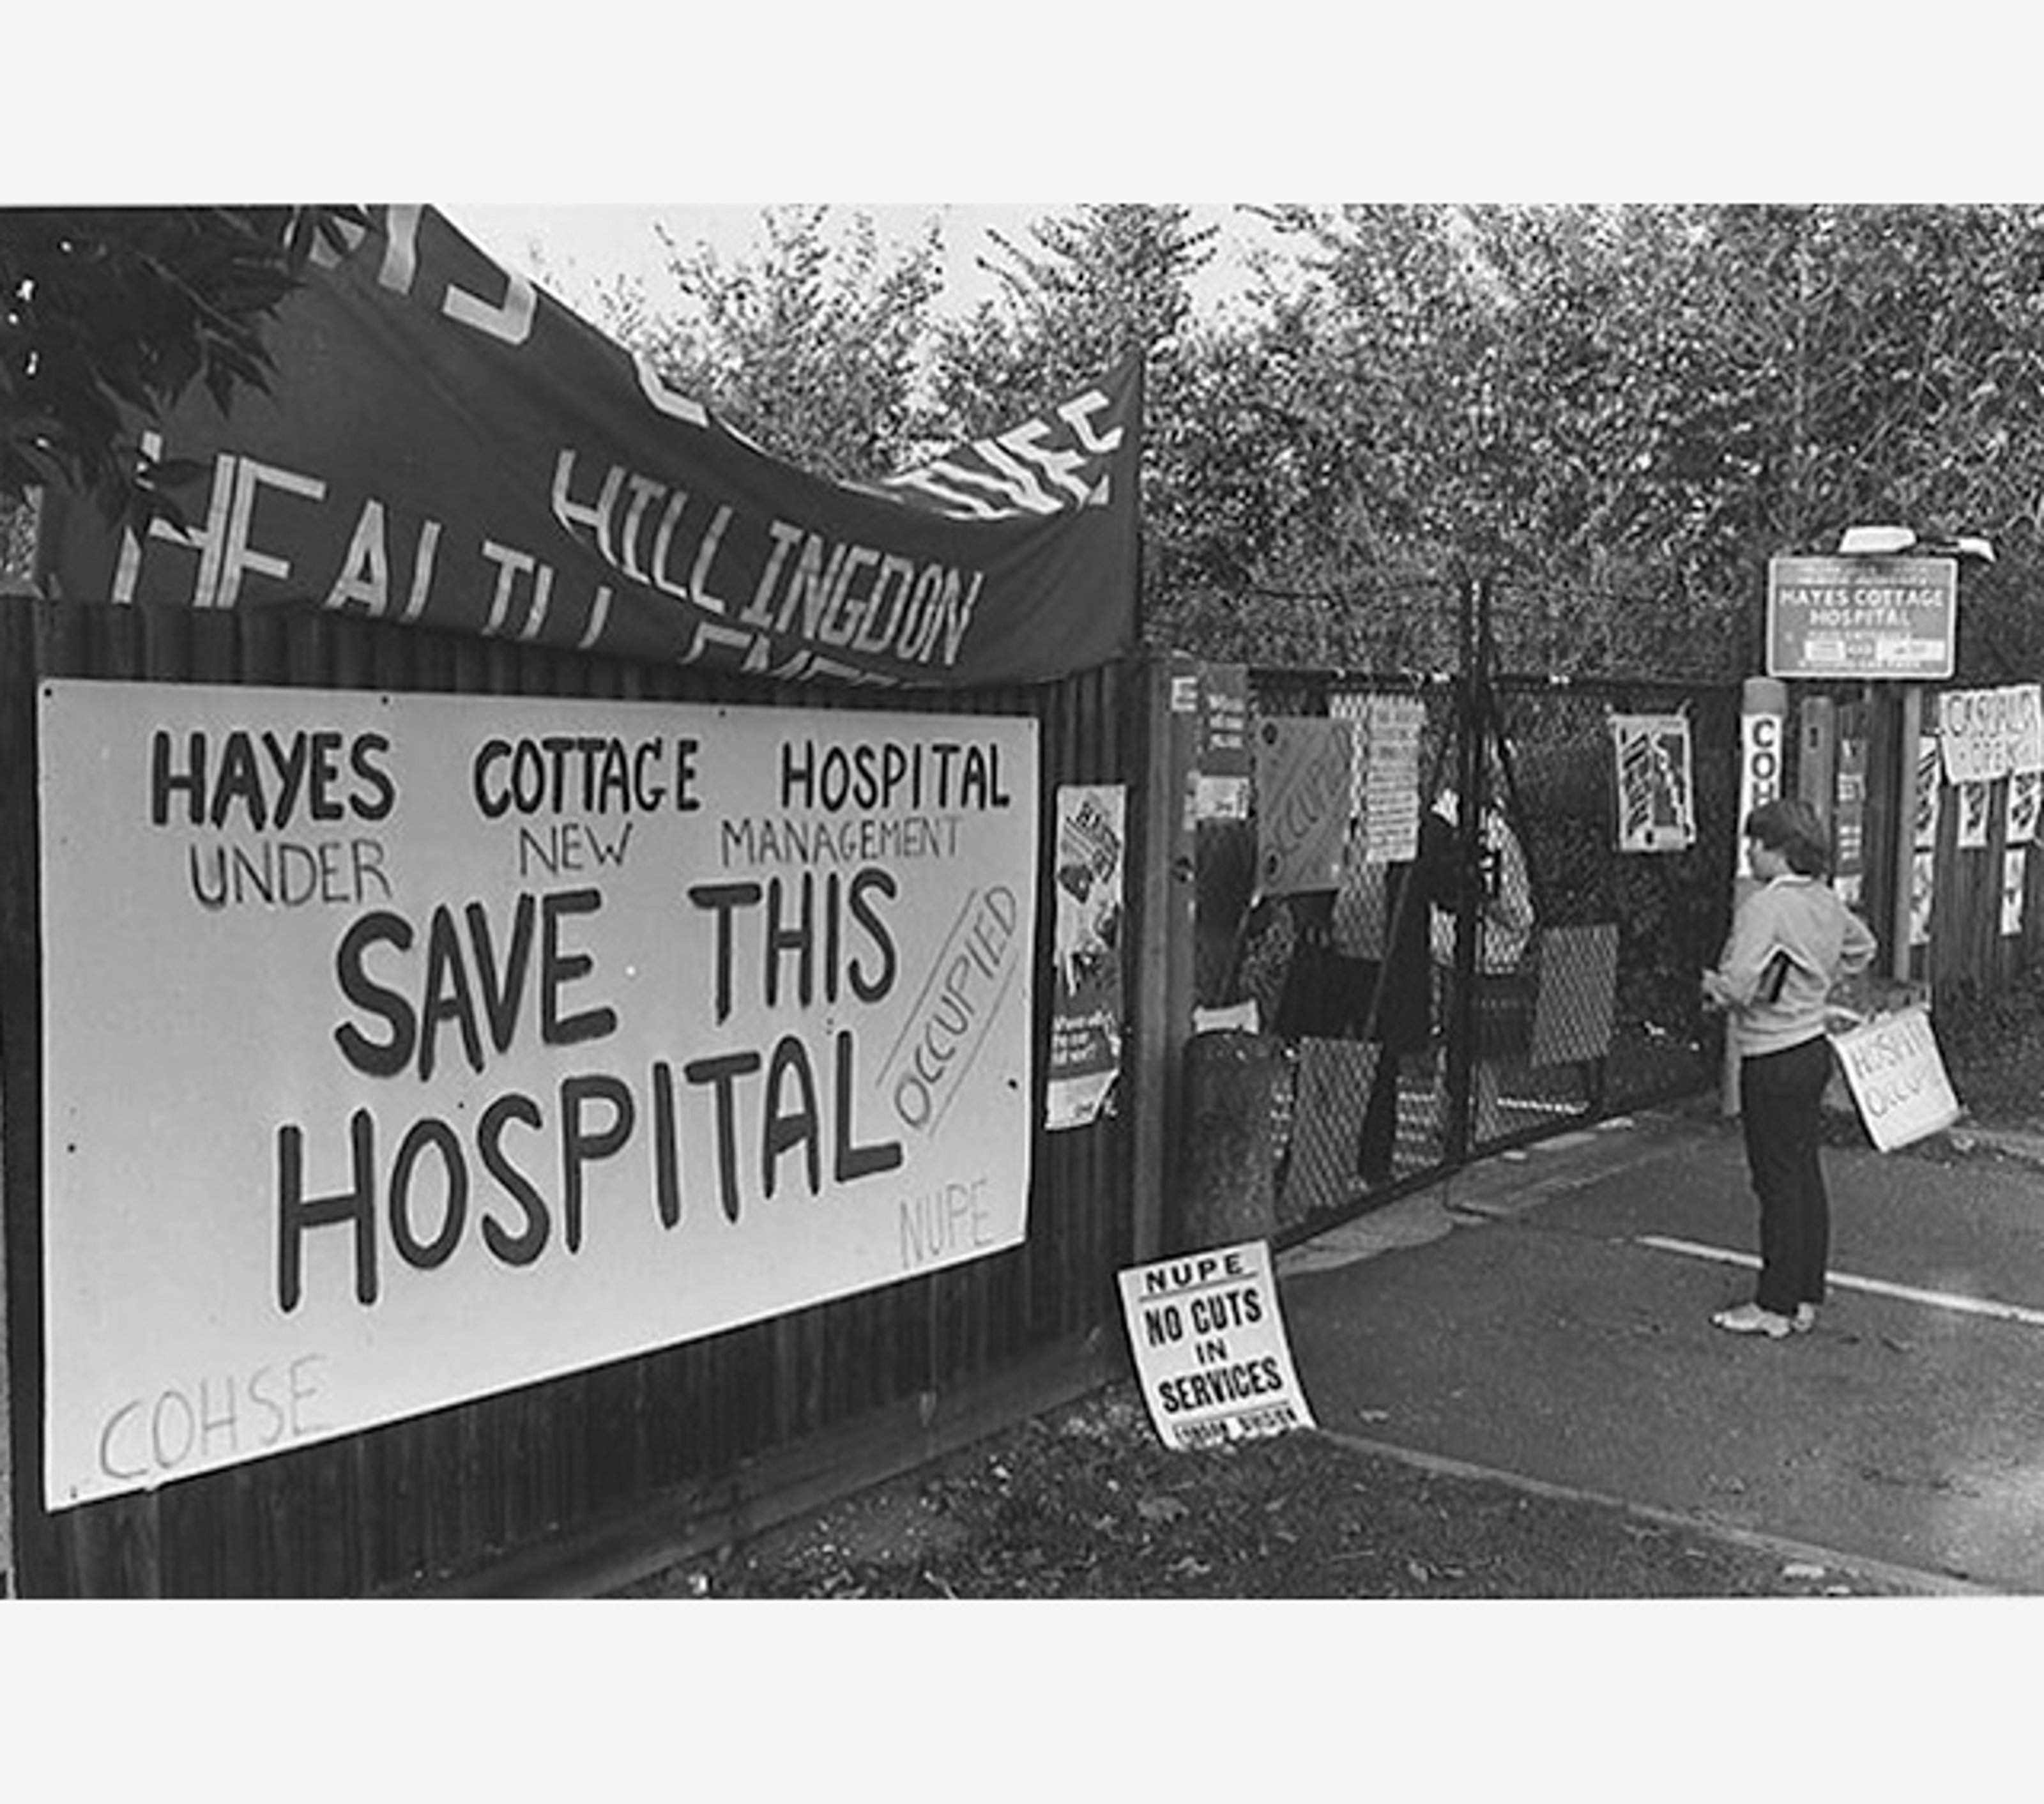 Black and white photograph of Hayes cottage hospital occupation